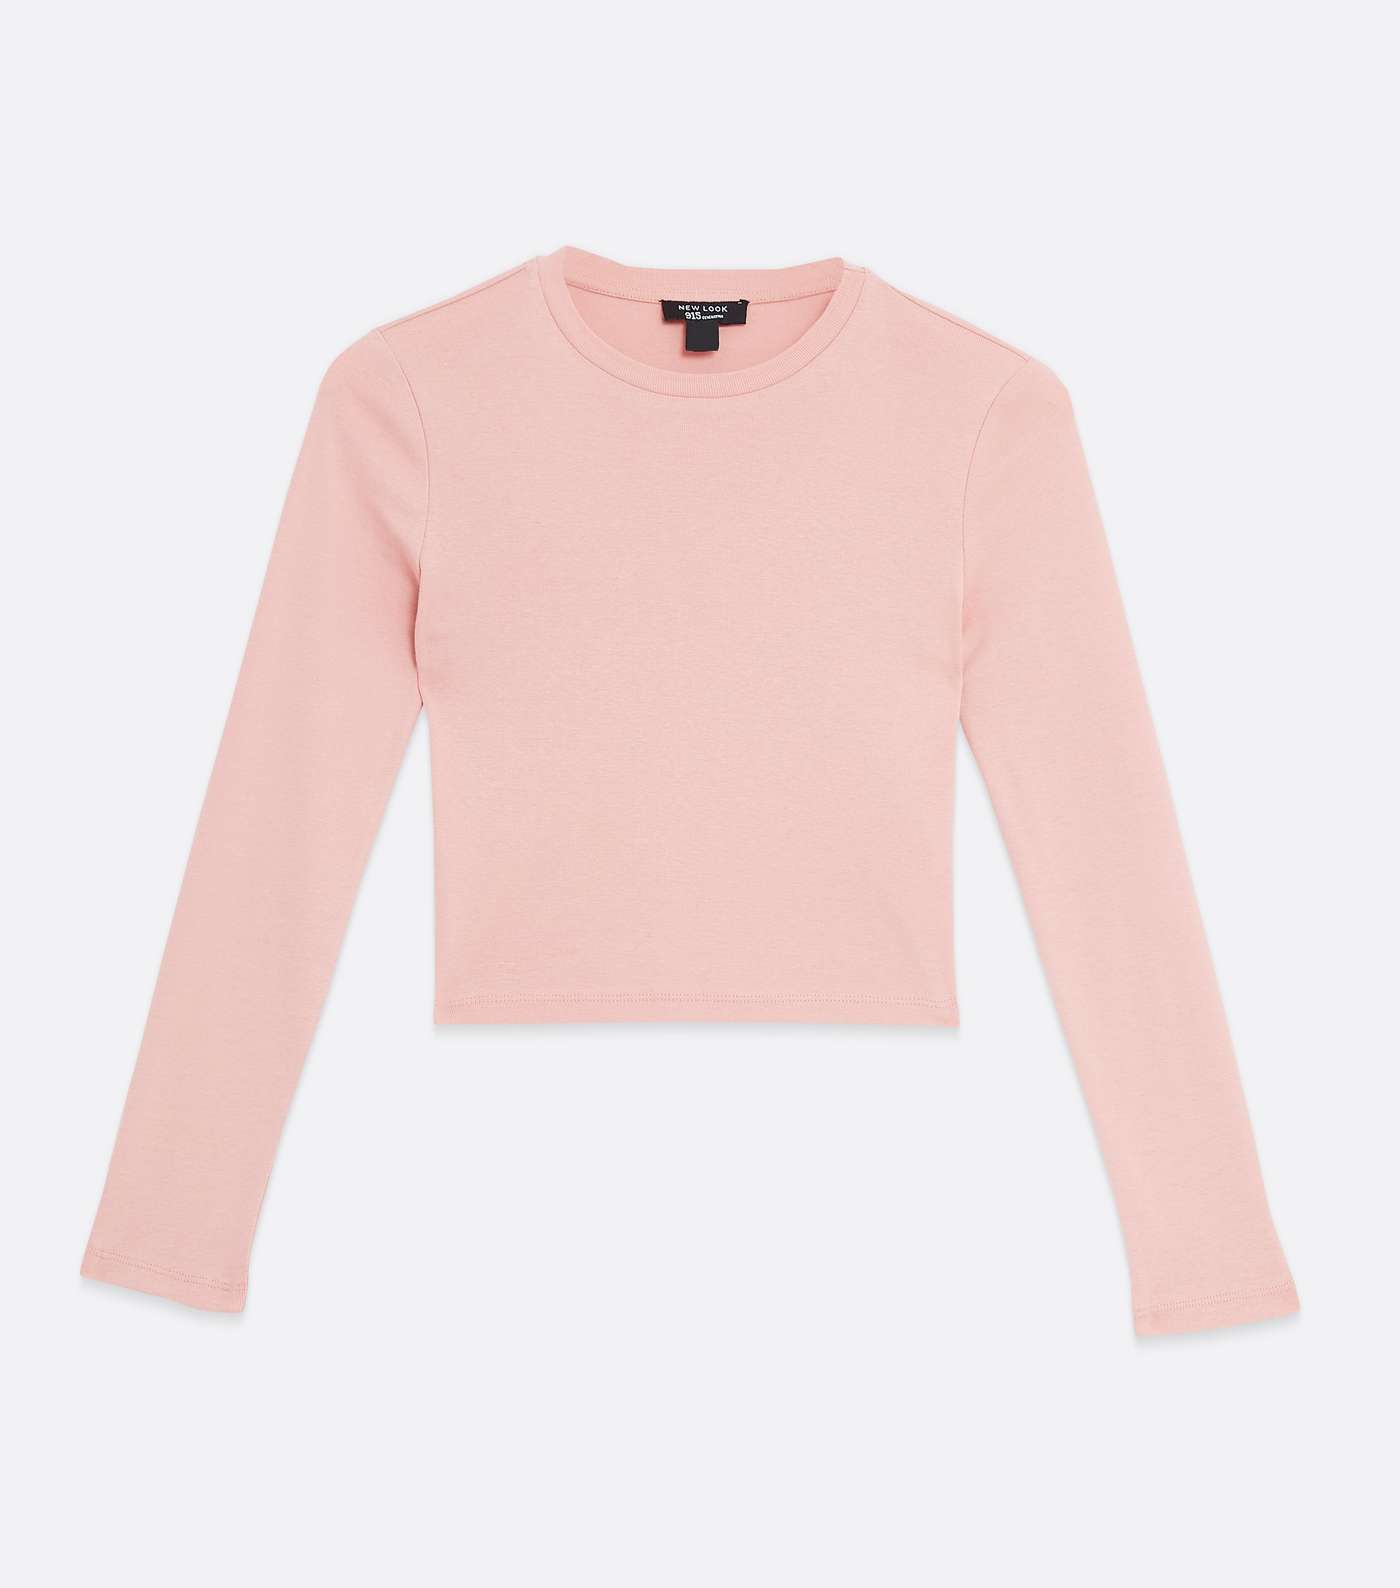 Girls Pale Pink Ribbed Long Sleeve Top Image 5